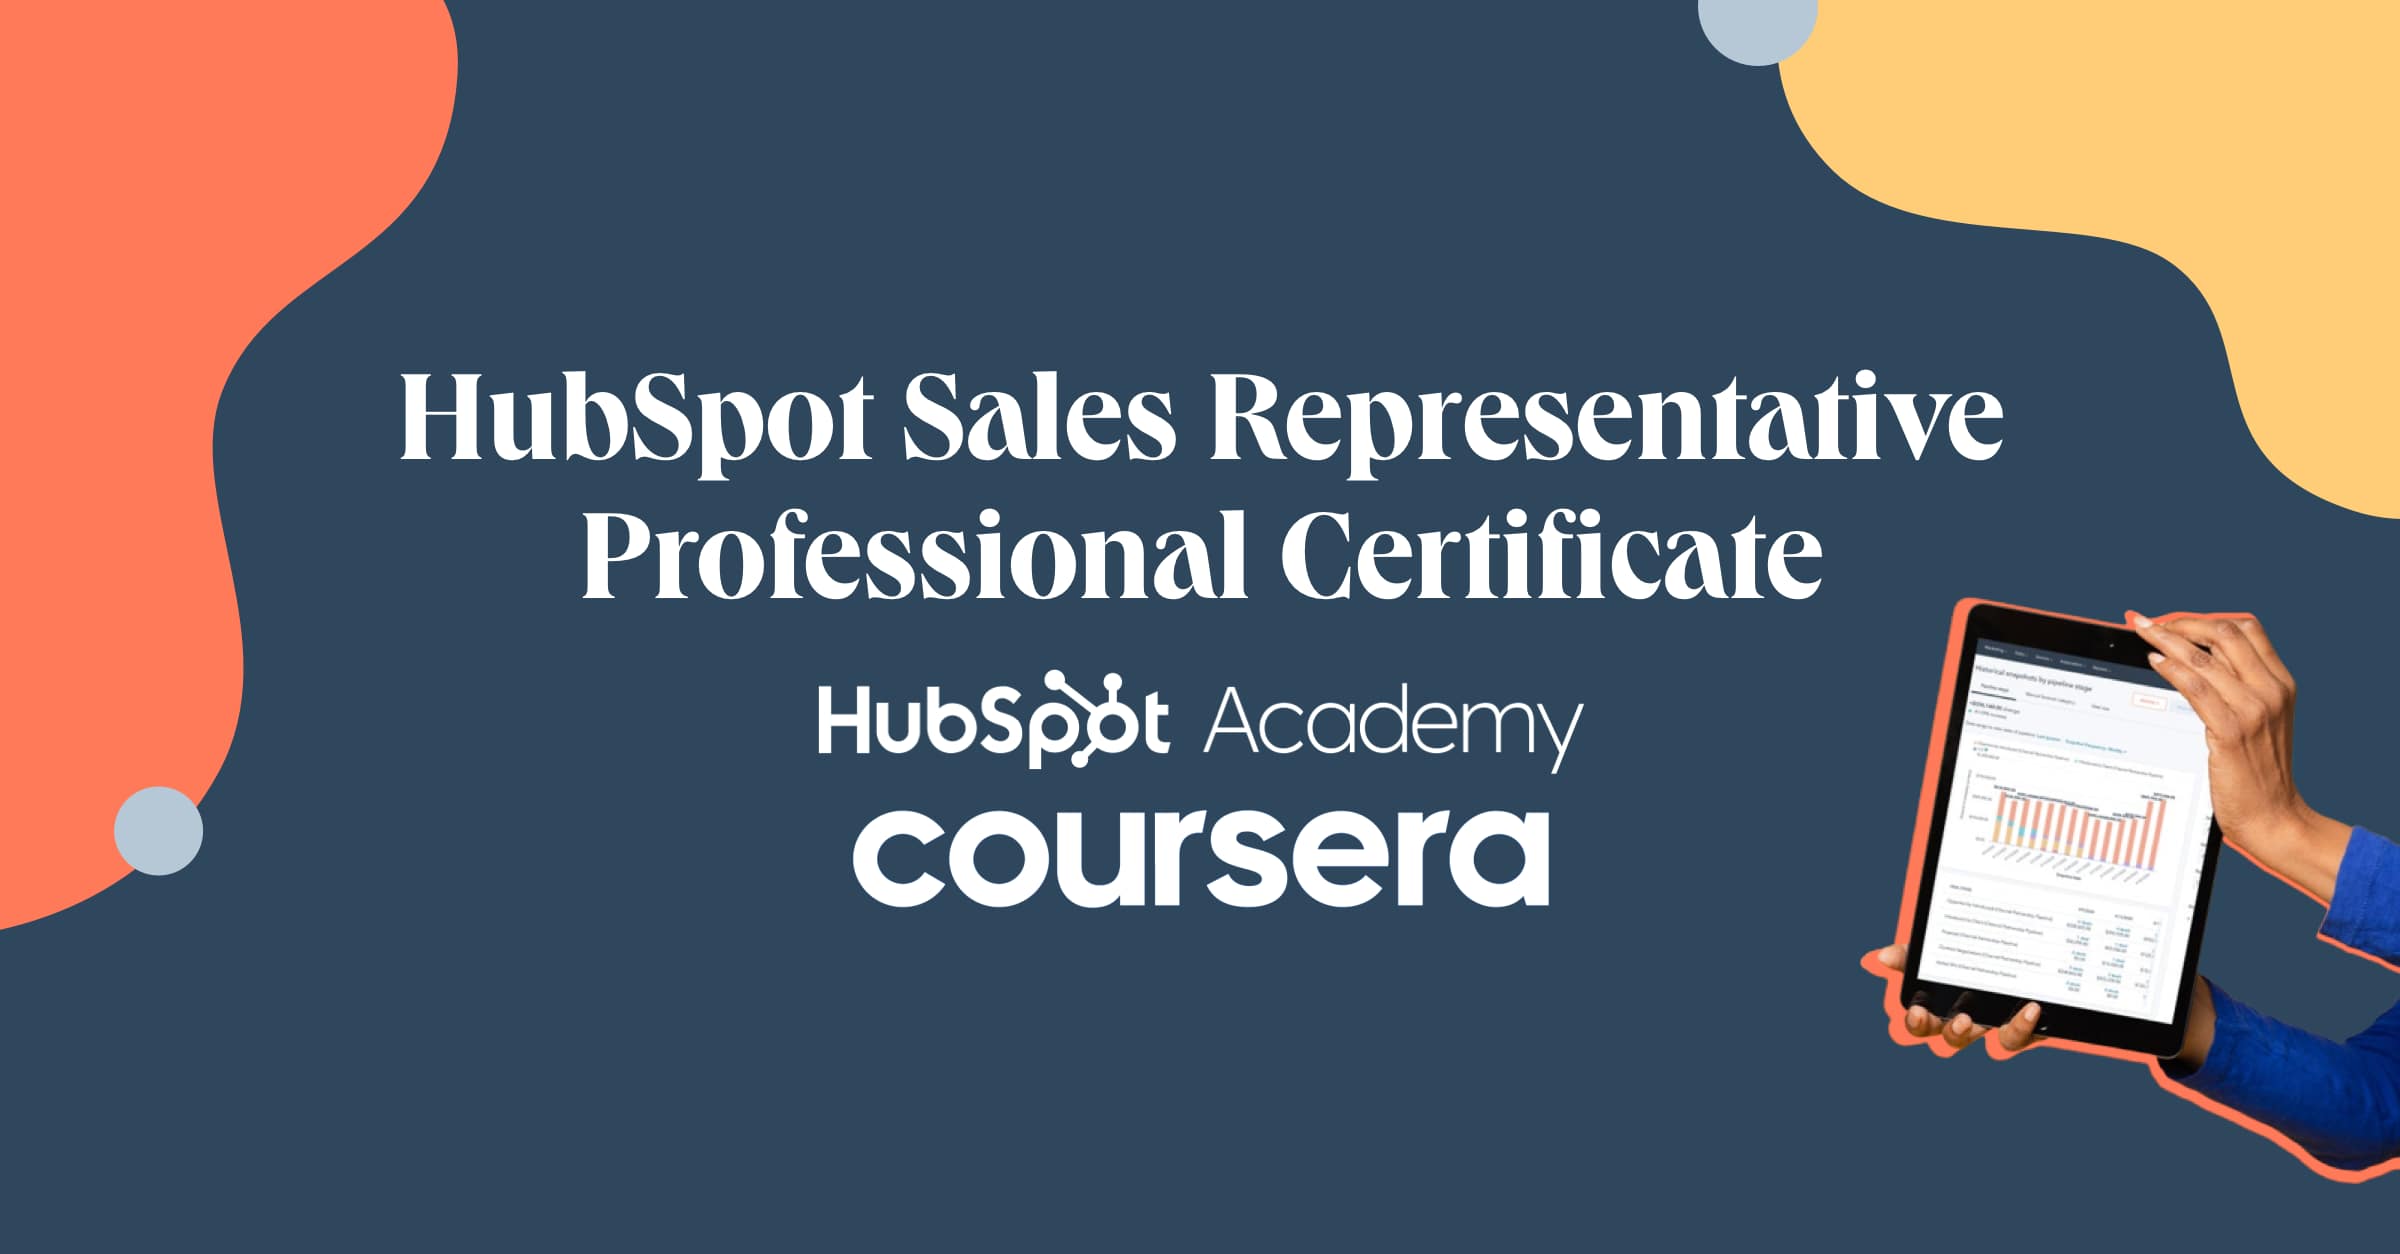 hubspot sales representative professional certificate with coursera